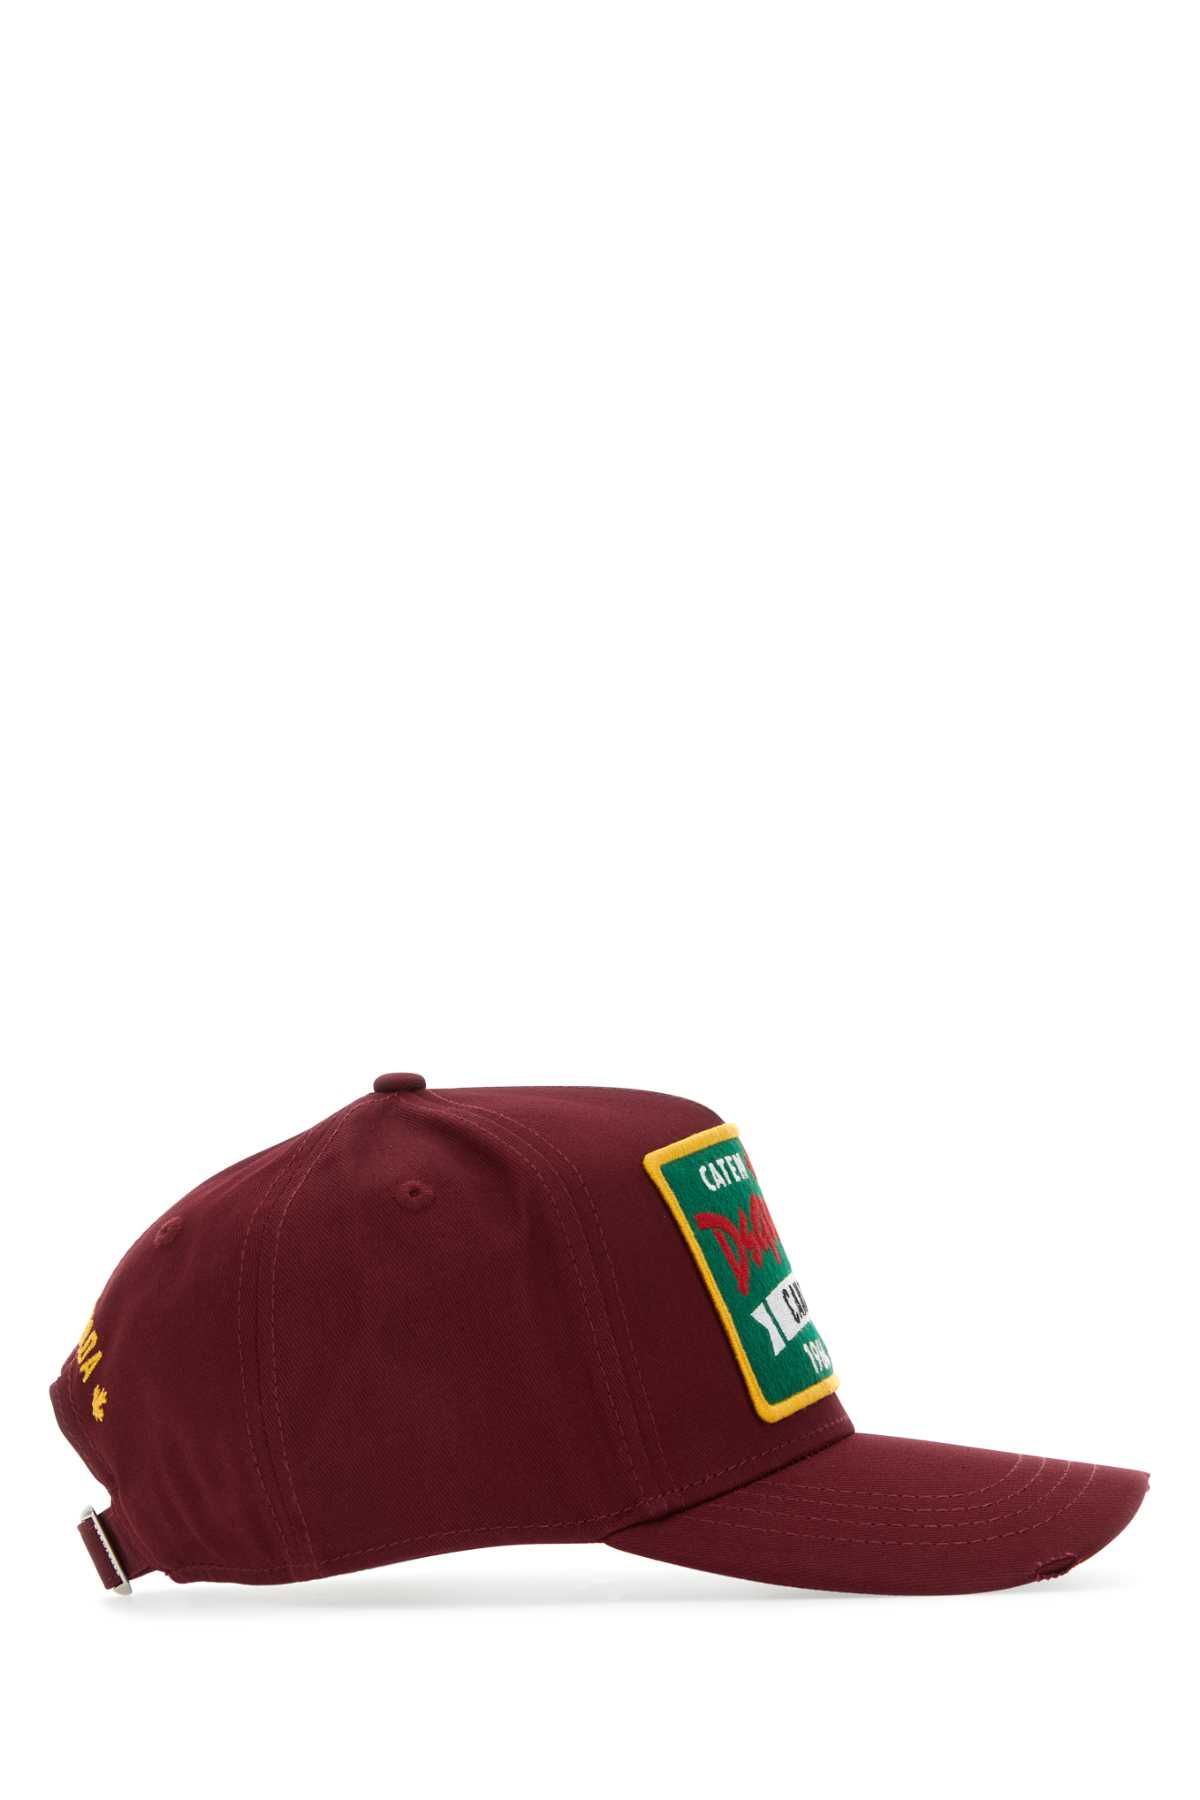 Dsquared2 Burgundy Cotton Baseball Cap In Brown